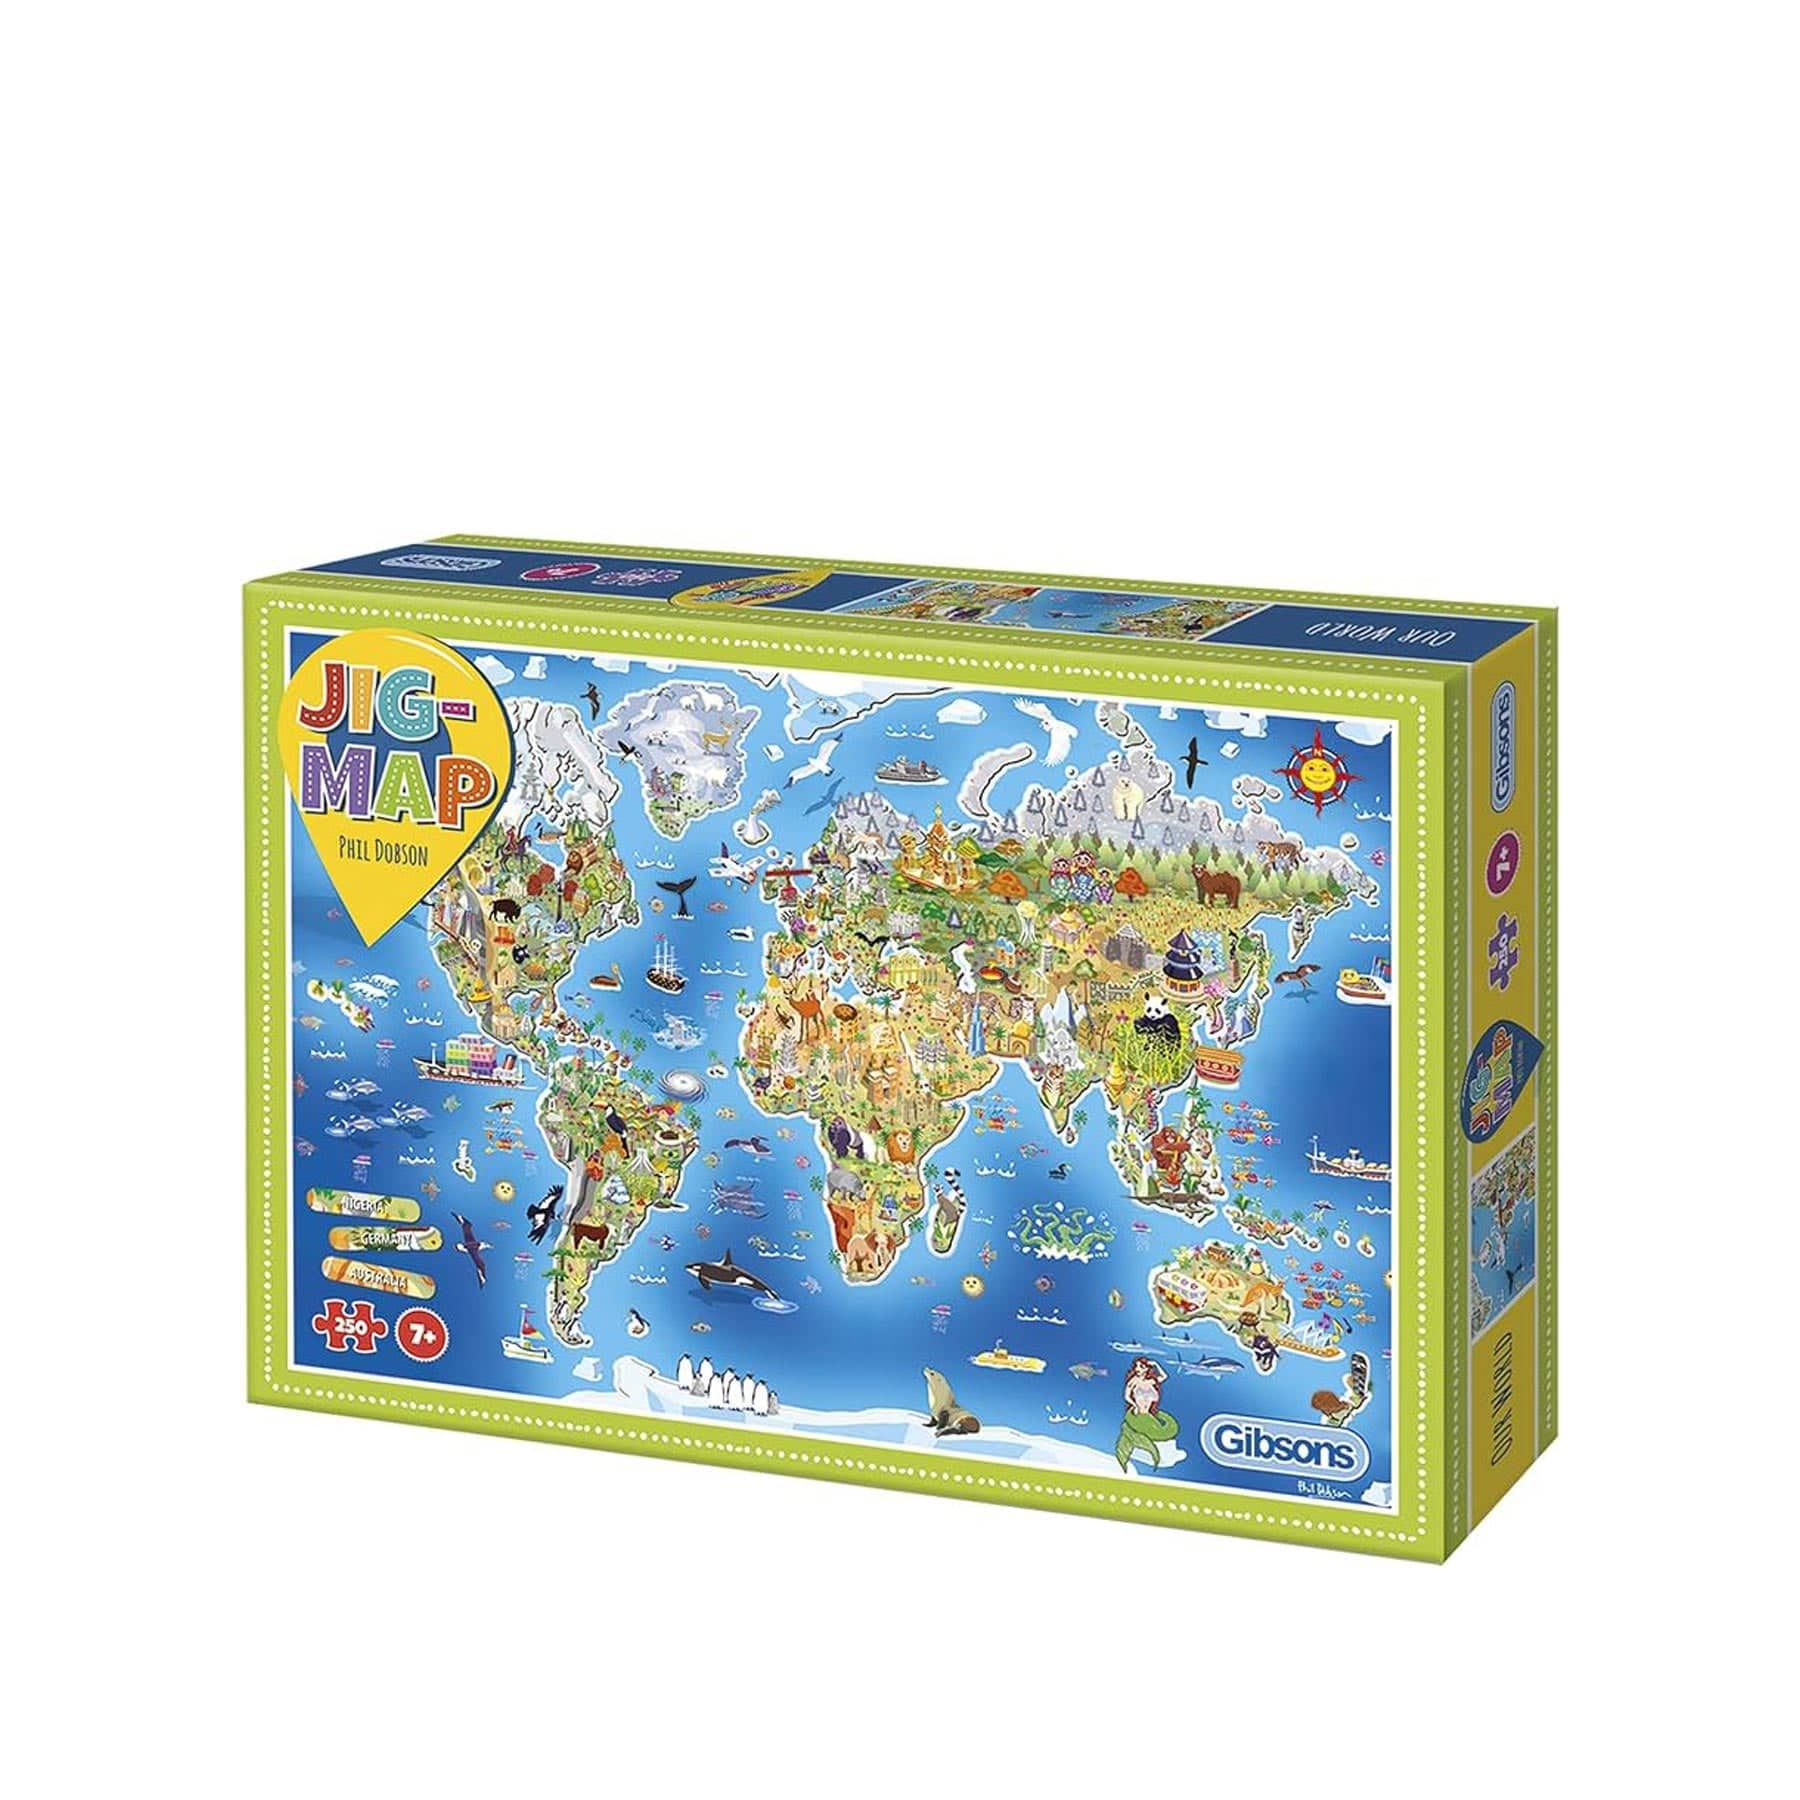 Jigmap our world 250 piece jigsaw puzzle